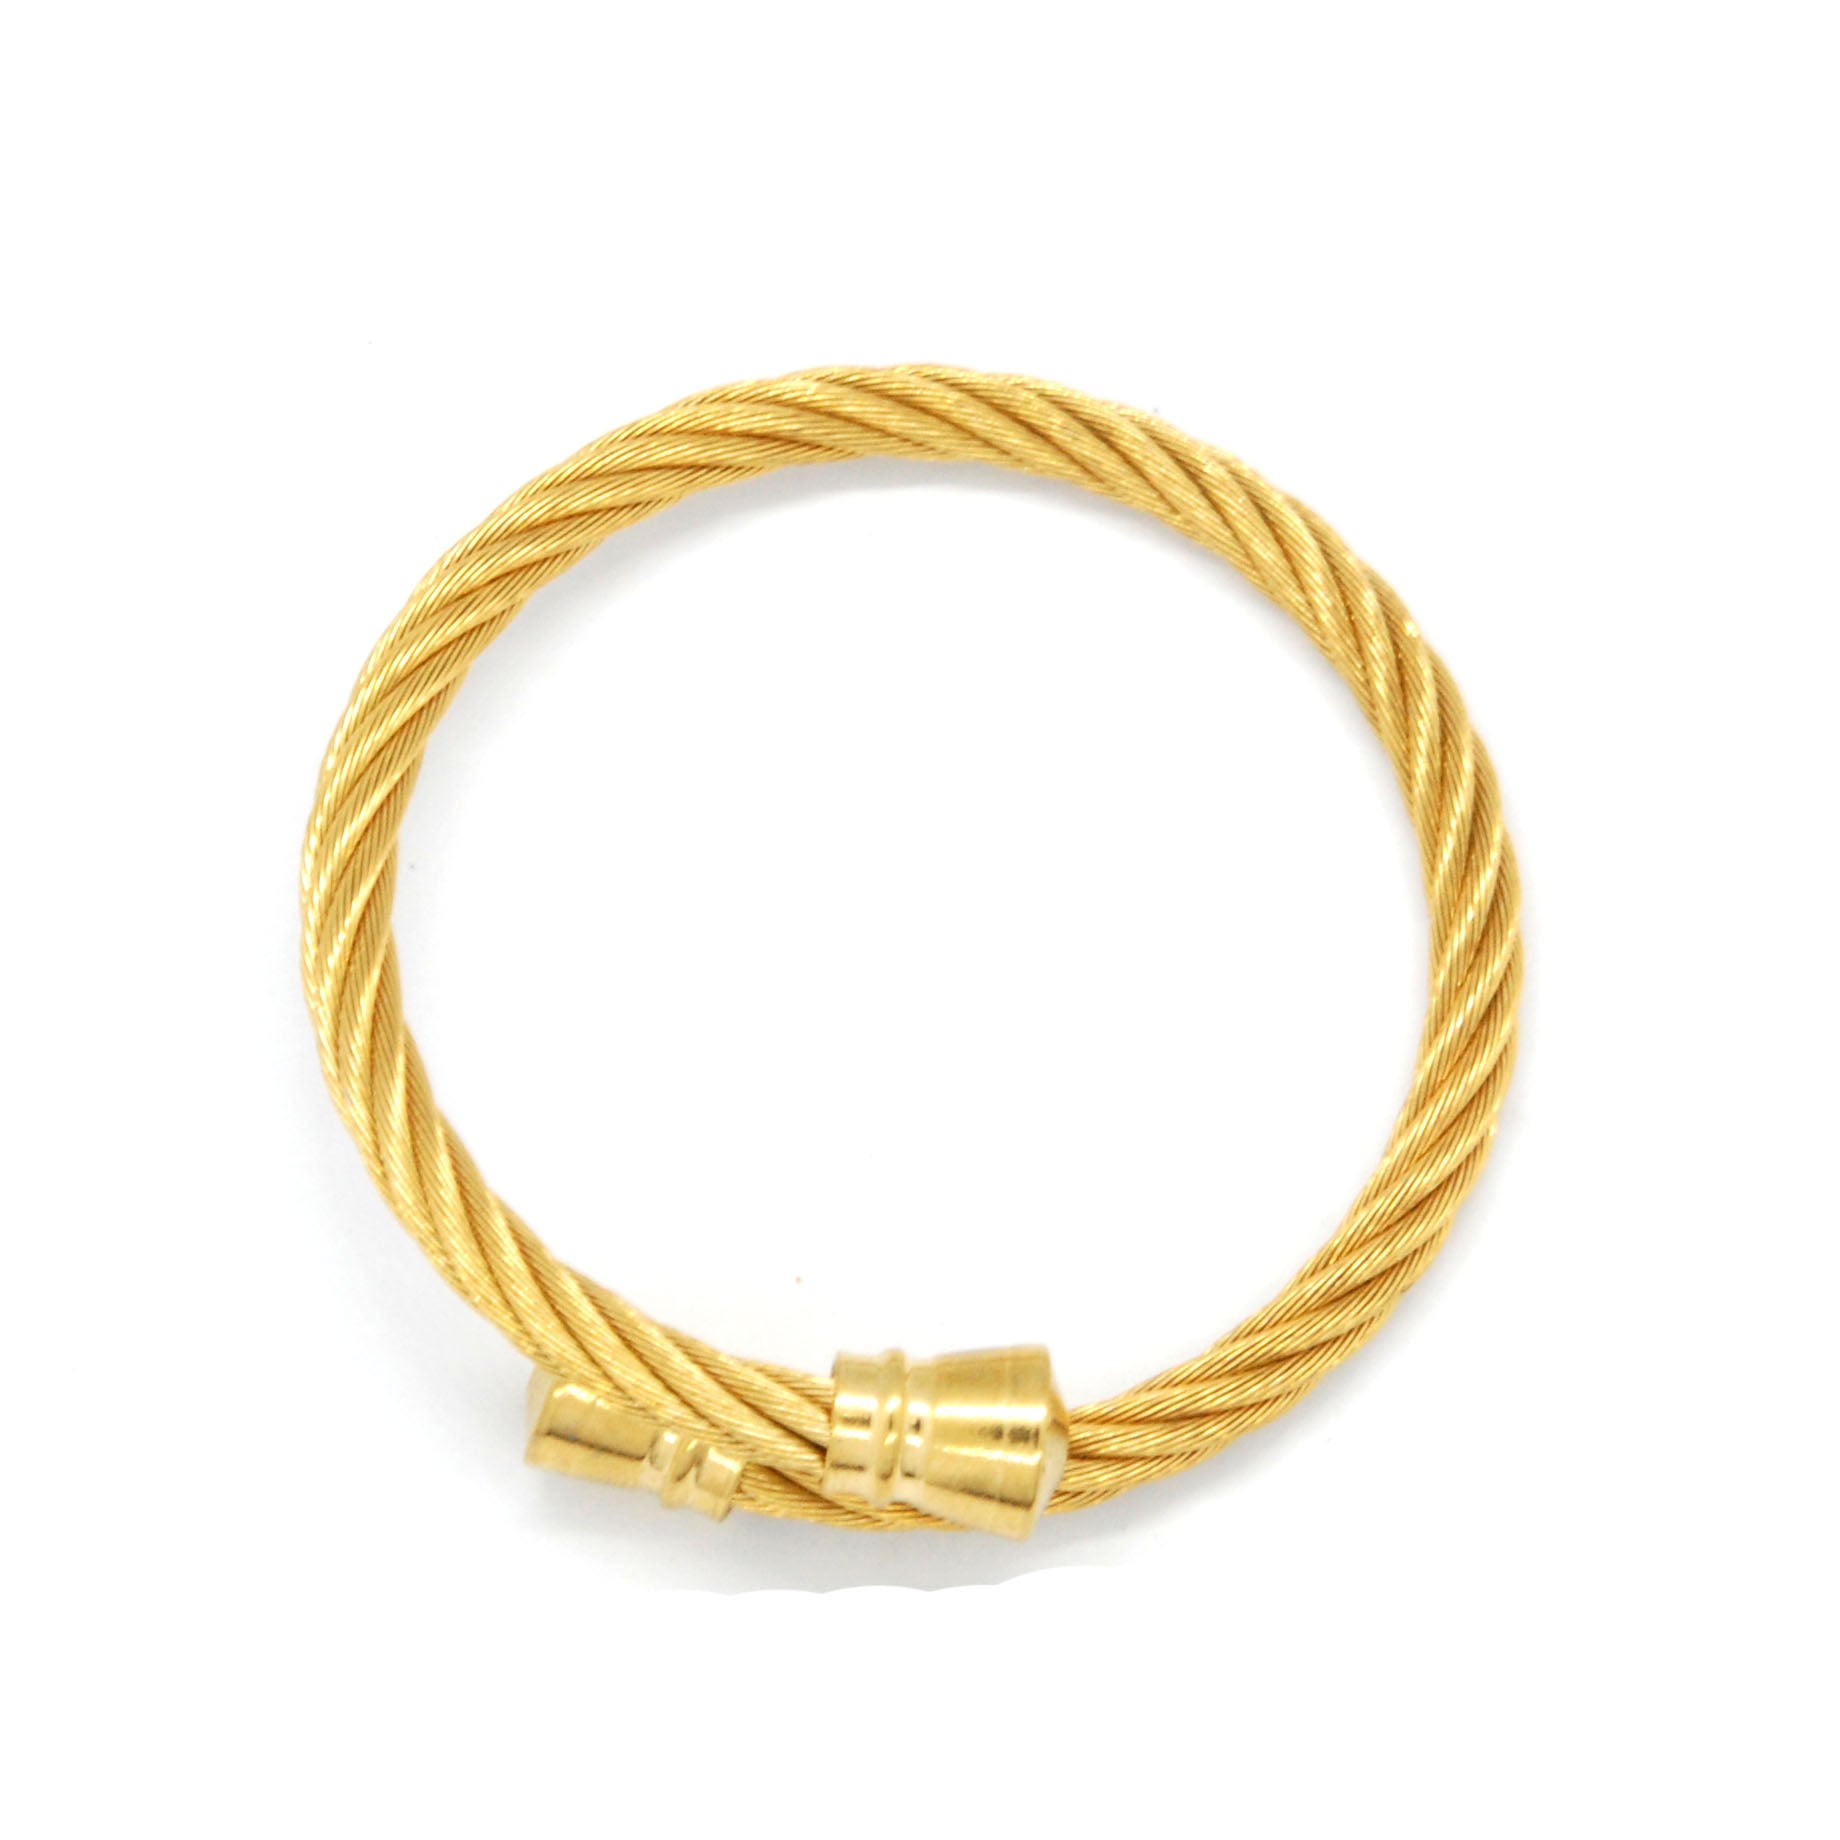 ESBG 7852: Gold-Plated Charriol Bangle w/ Gold-Plated Barrel Ends